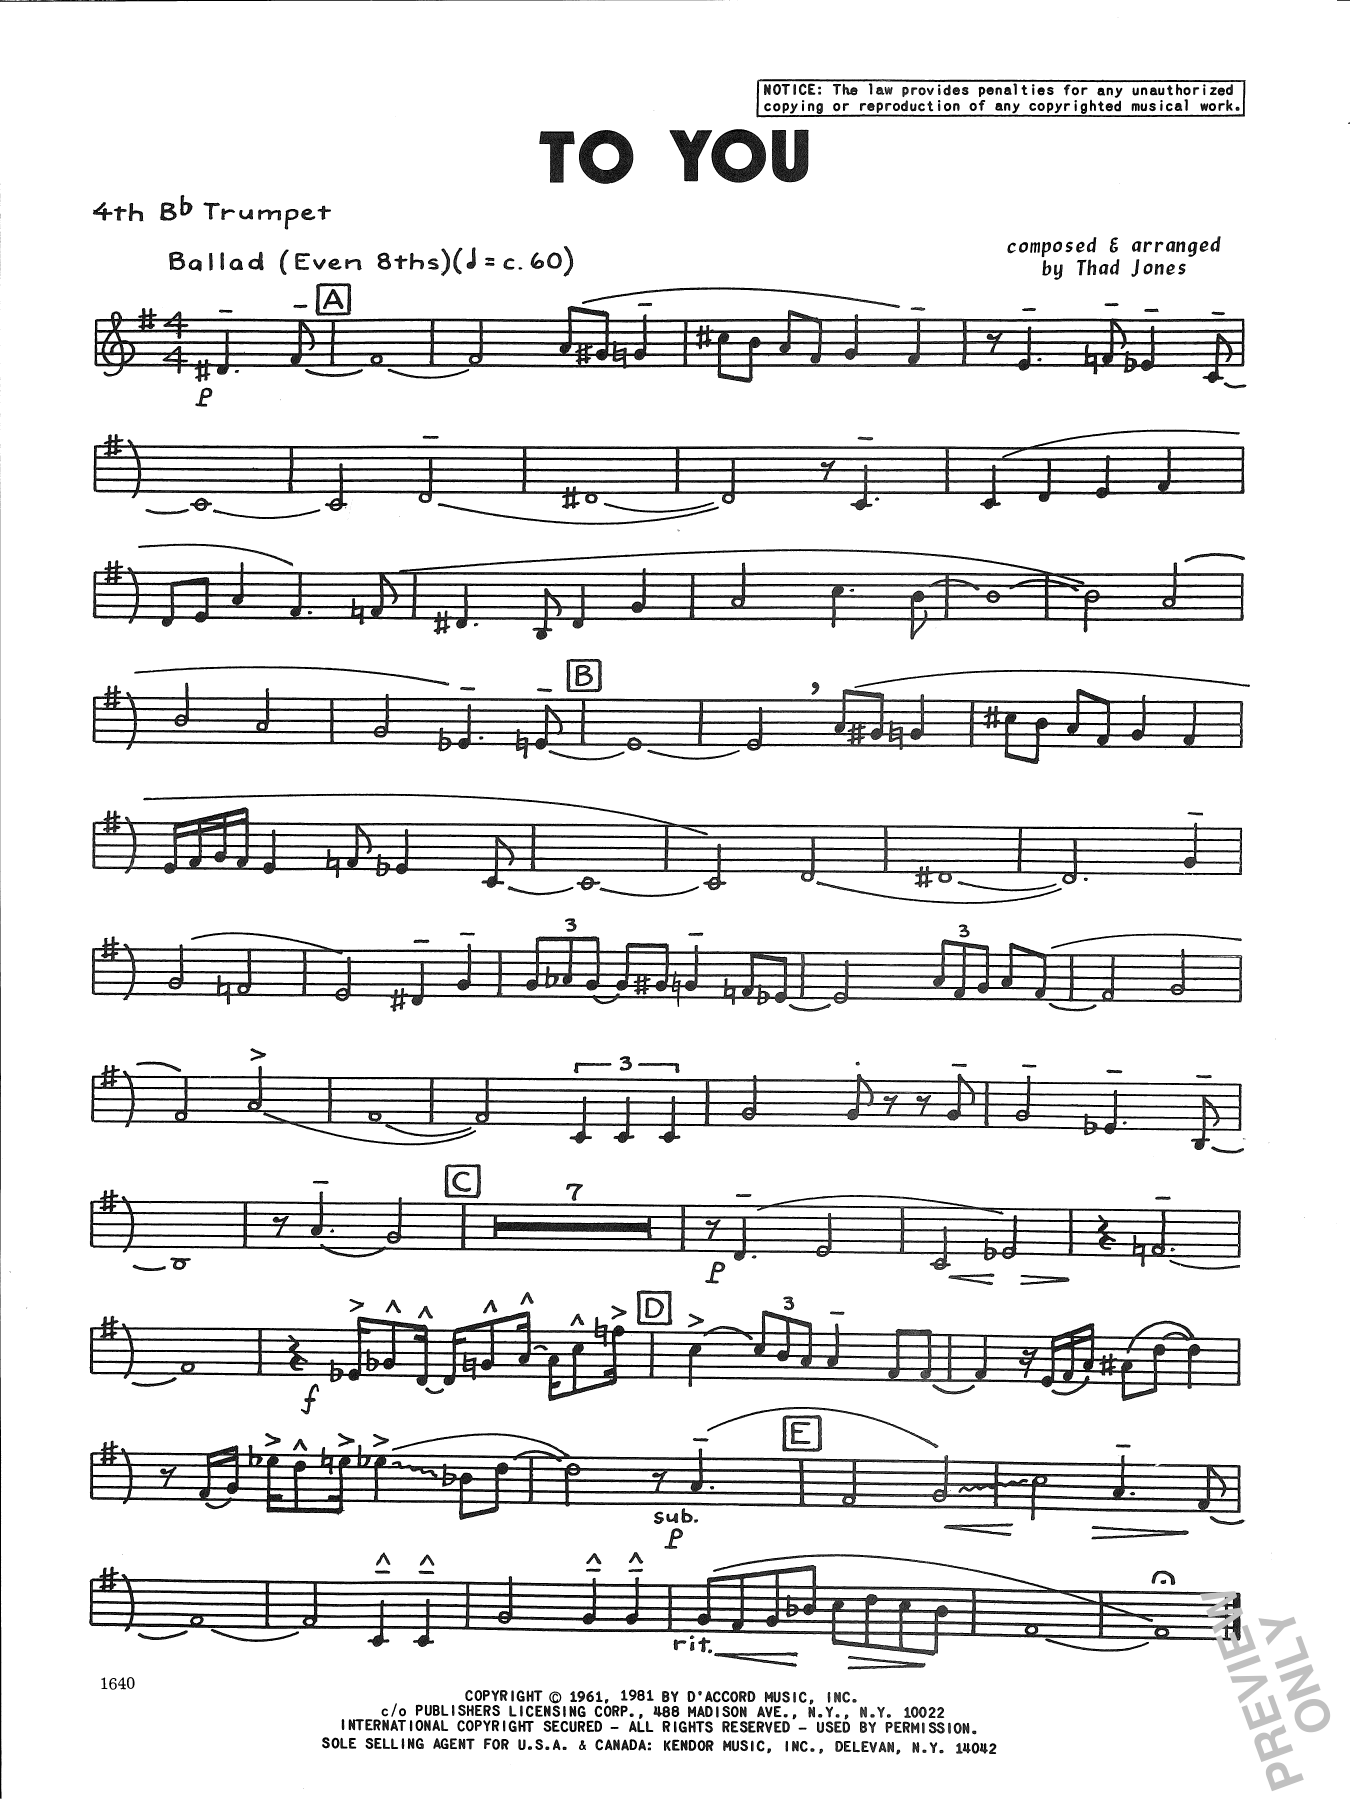 Download Thad Jones To You - 4th Bb Trumpet Sheet Music